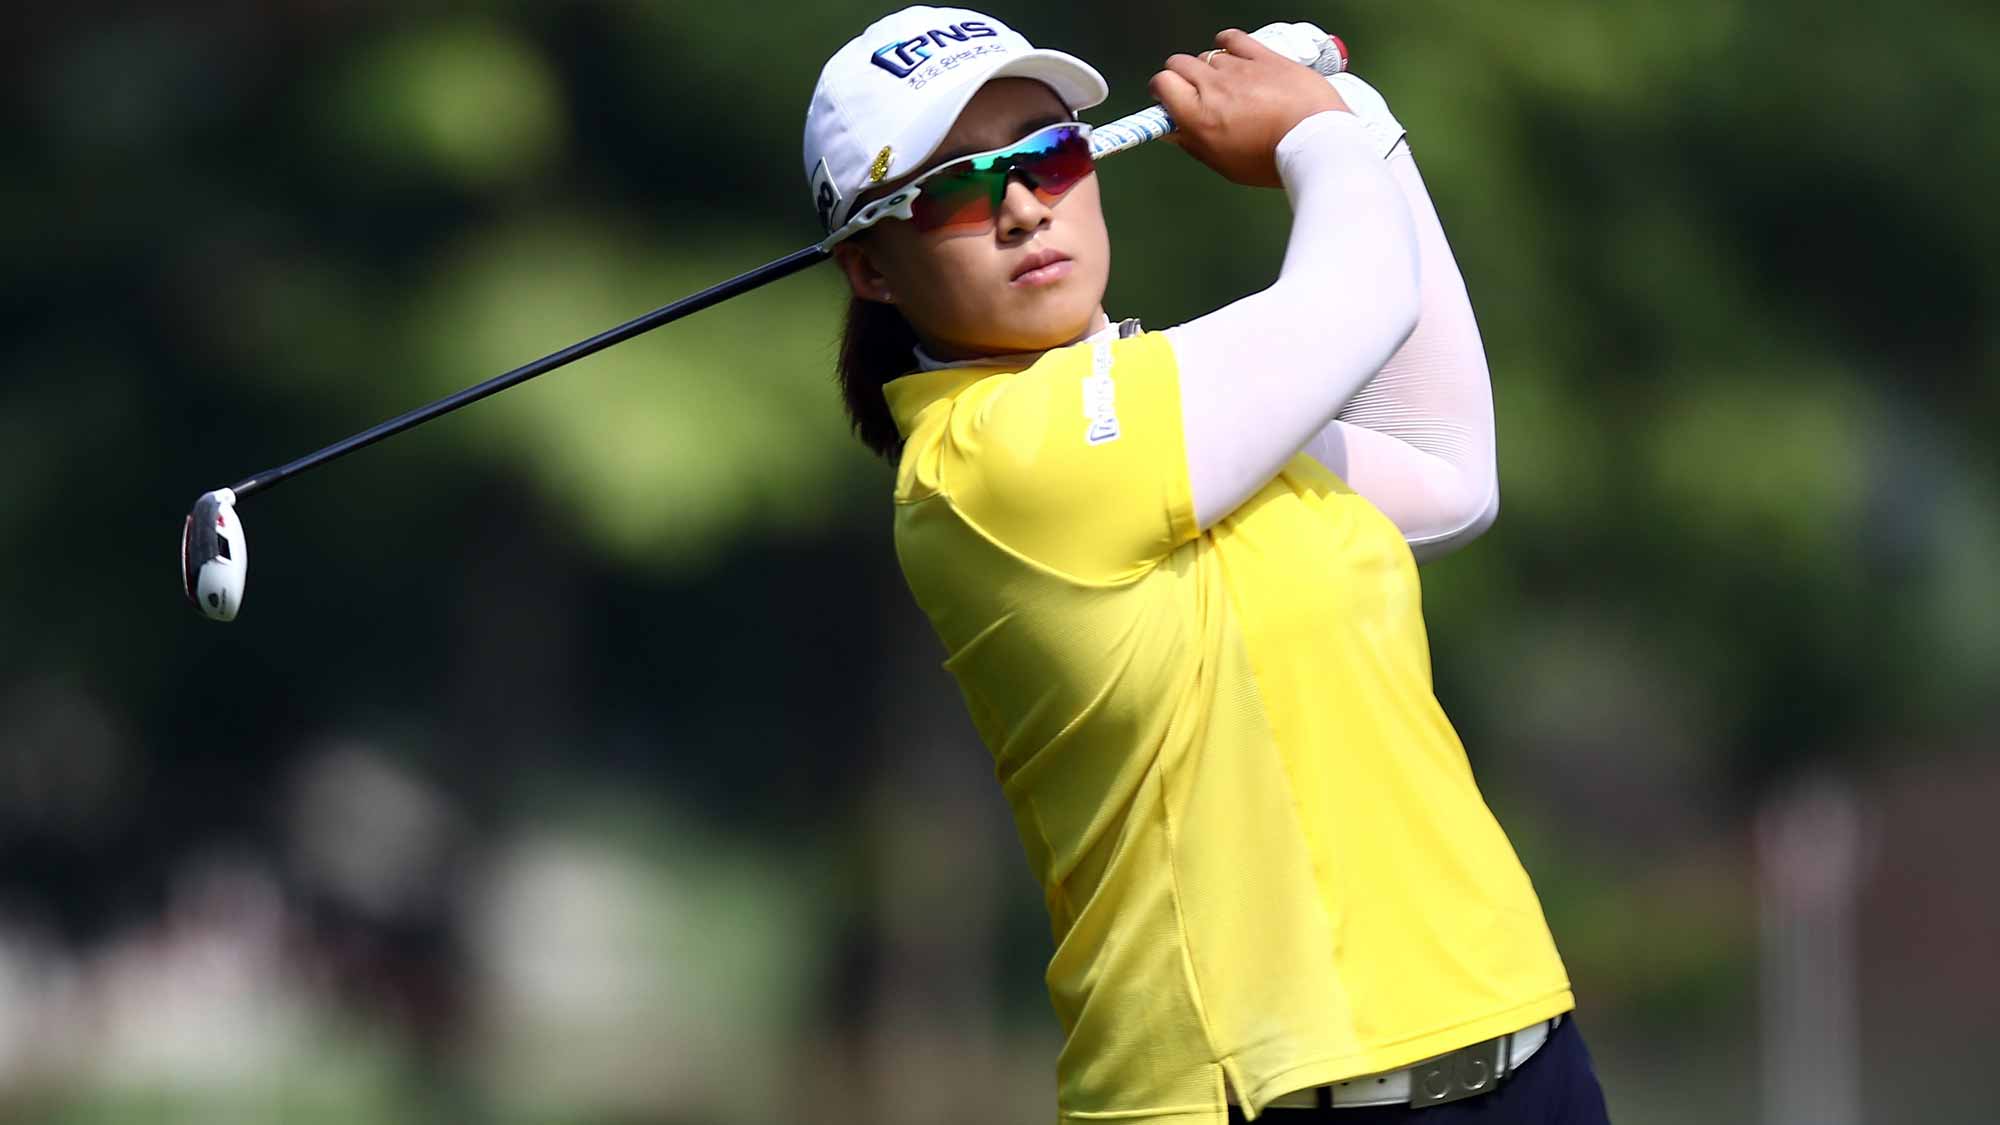 Amy Yang of South Korea plays her 2nd shot on the 8th hole during round one of the Sime Darby LPGA Tour at Kuala Lumpur Golf & Country Club